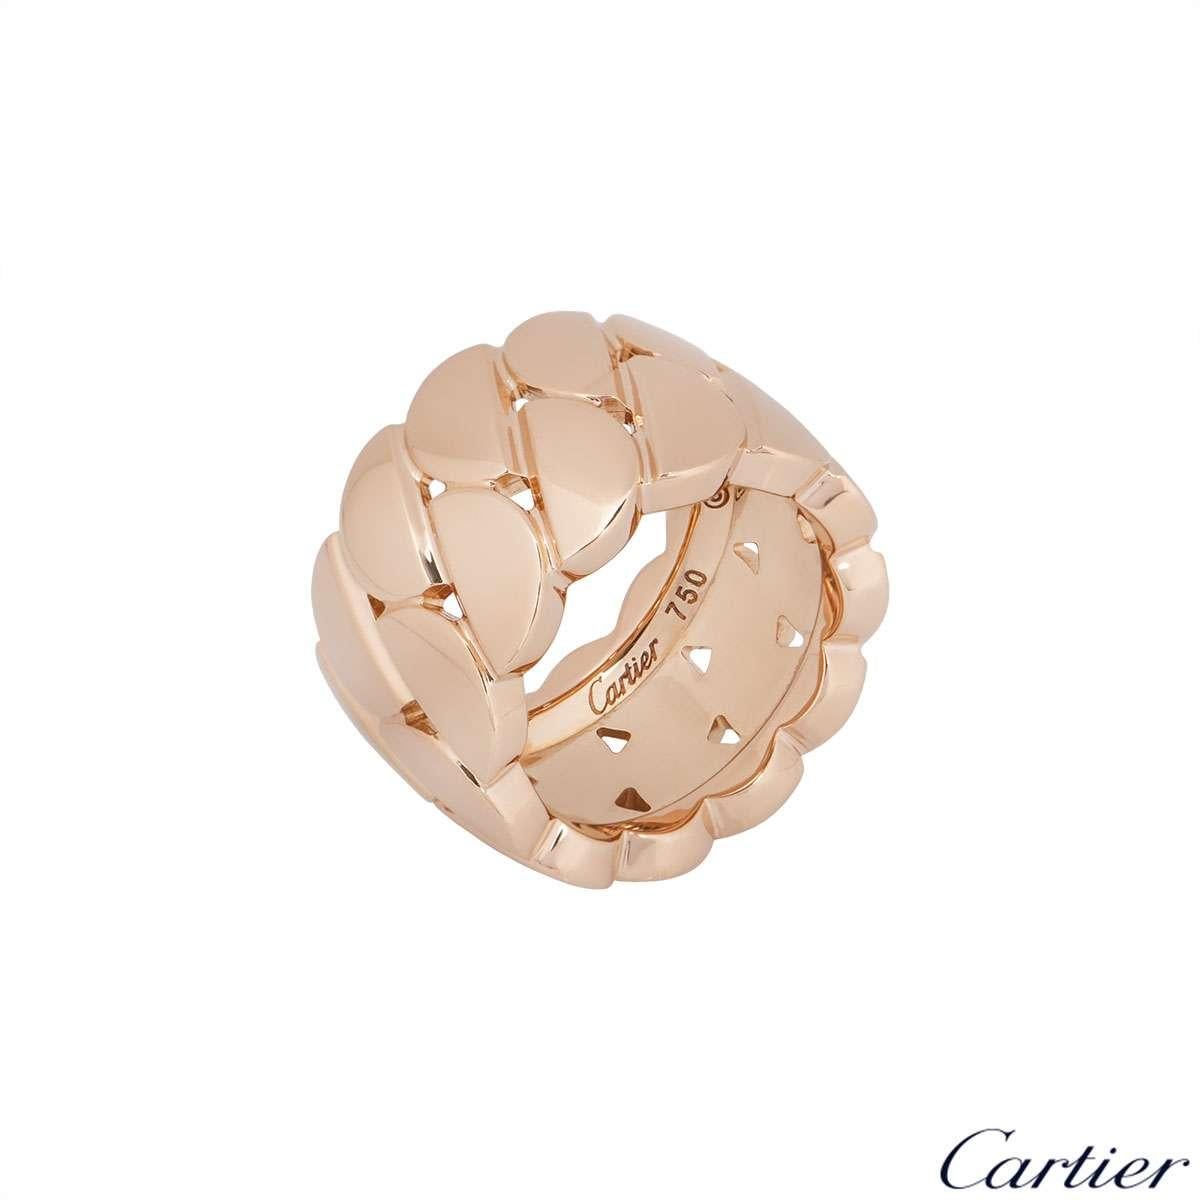 An 18k rose gold ring by Cartier from the La Dona collection. The 13mm ring is composed of two rows of interlinking semi-circular links throughout. The ring is a size UK L/US 5.5/EU 51 and has a gross weight of 19.90 grams.

The ring comes complete